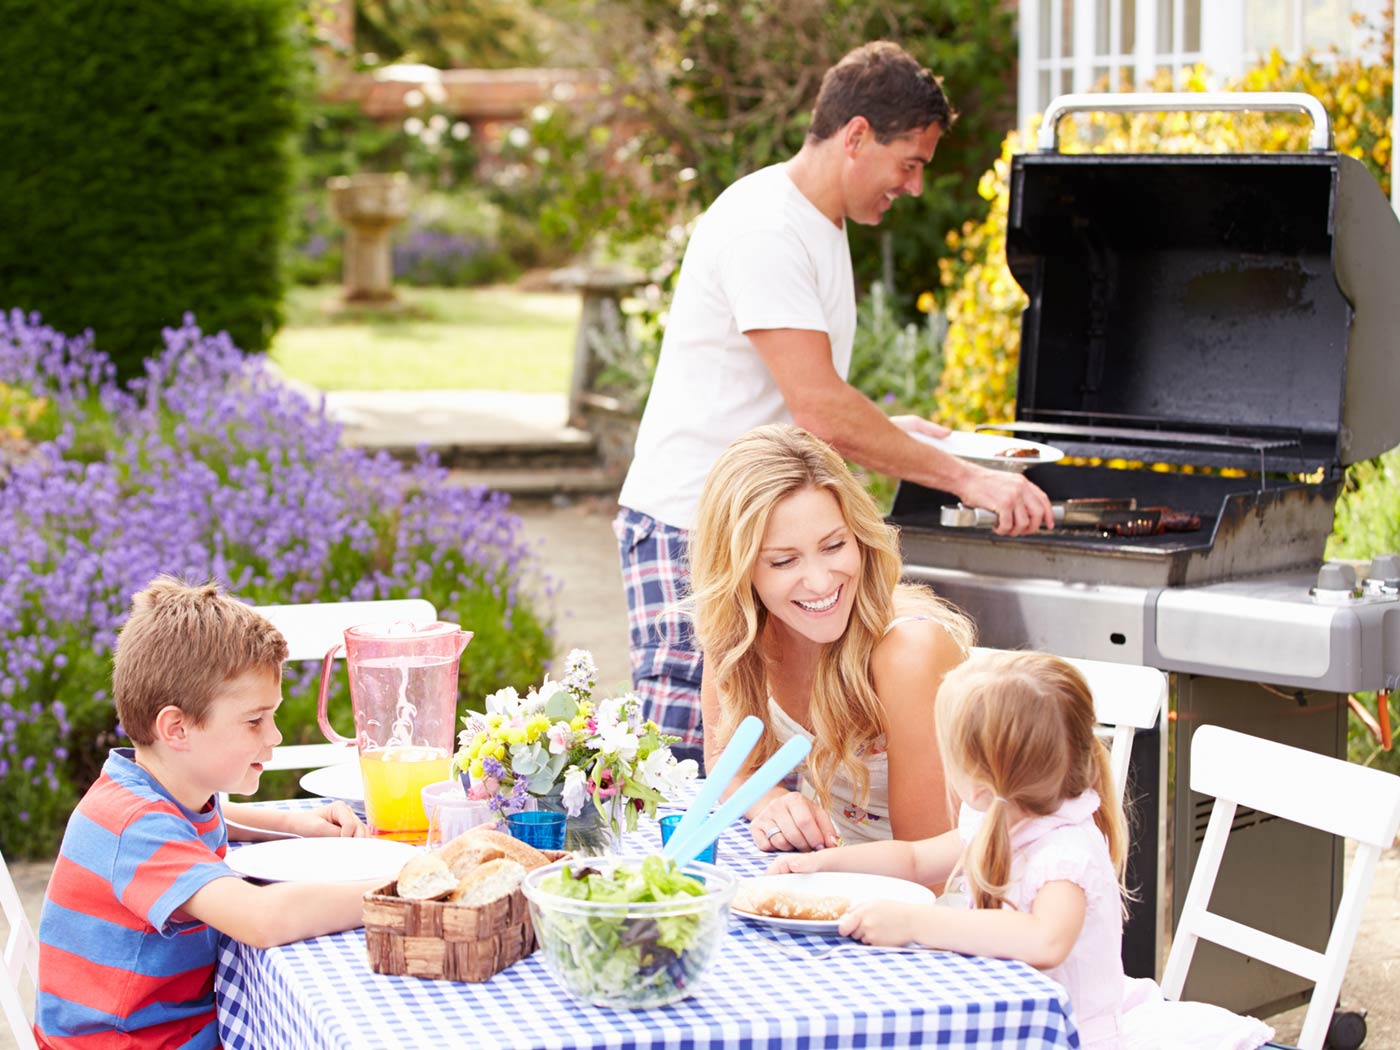 Family of four with dad grilling while mom and kids sit at table.